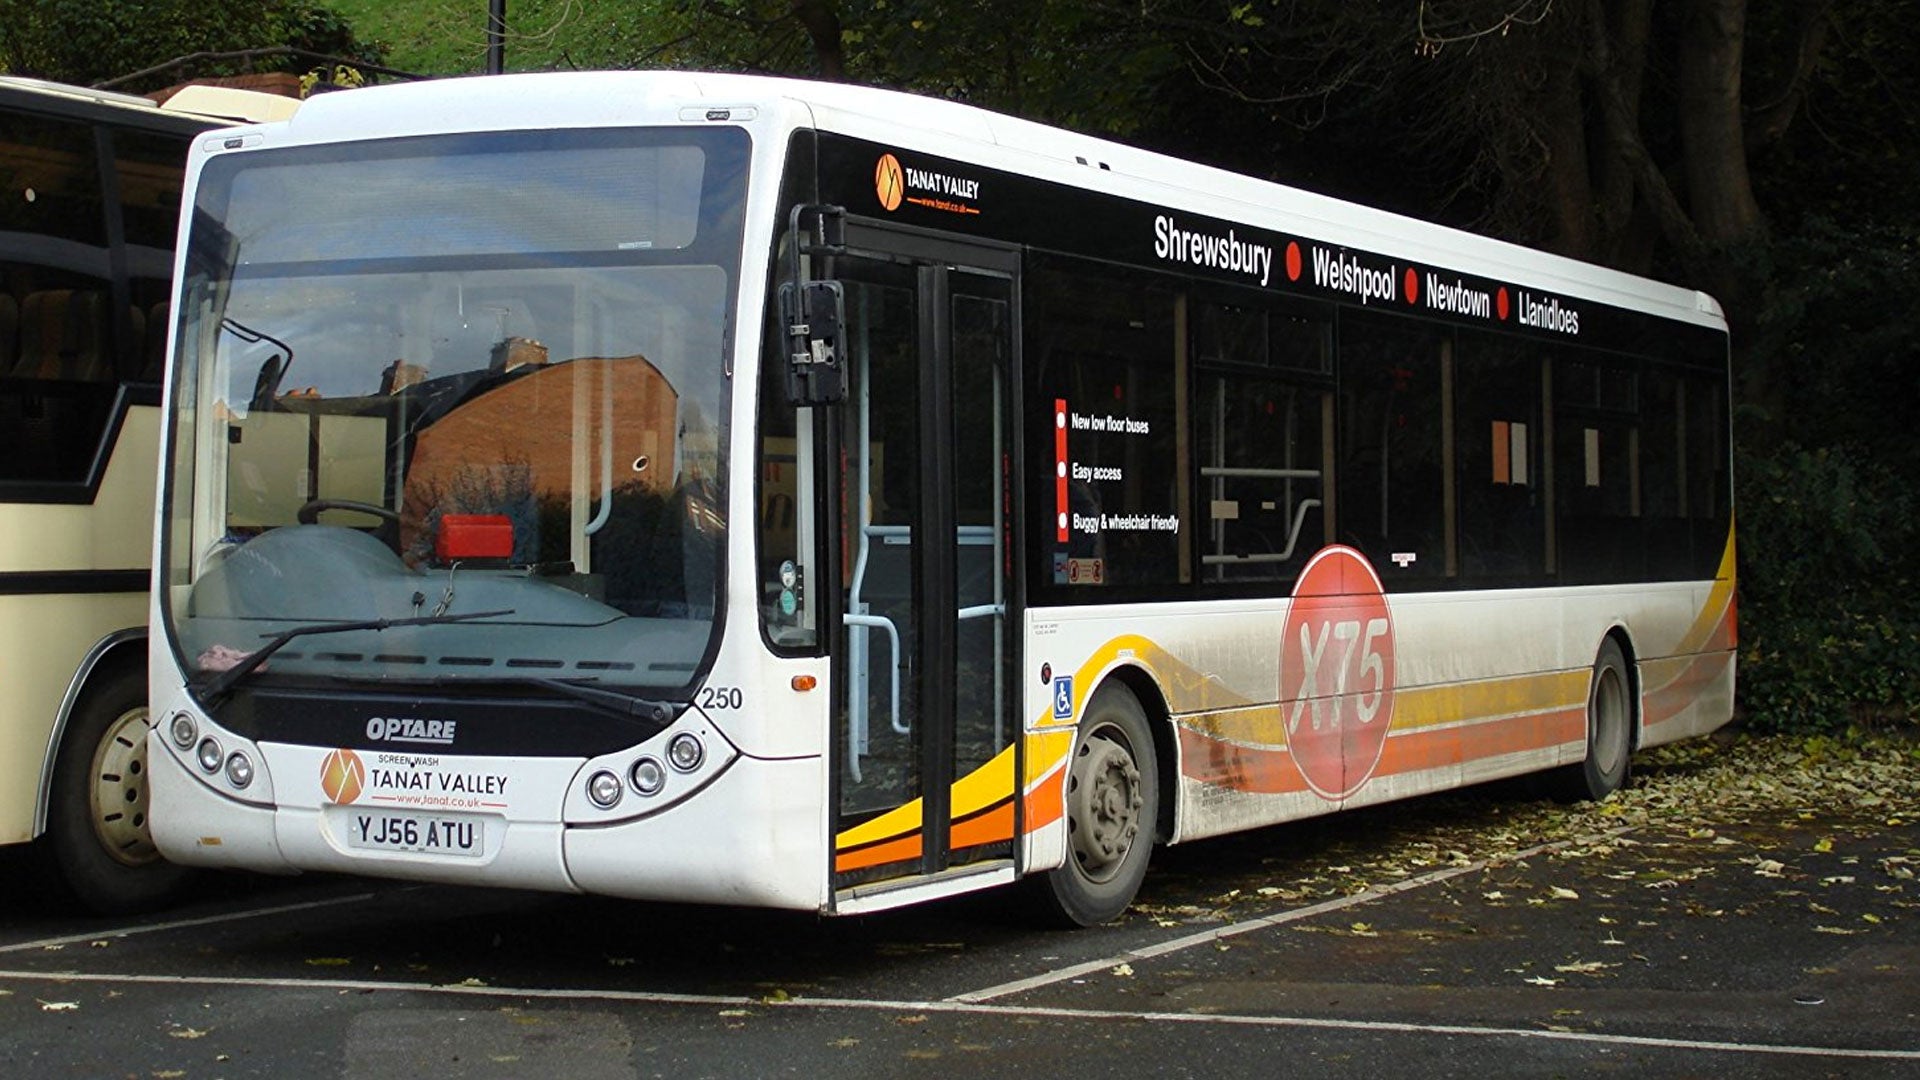 Tanant Valley latest Bus company on board